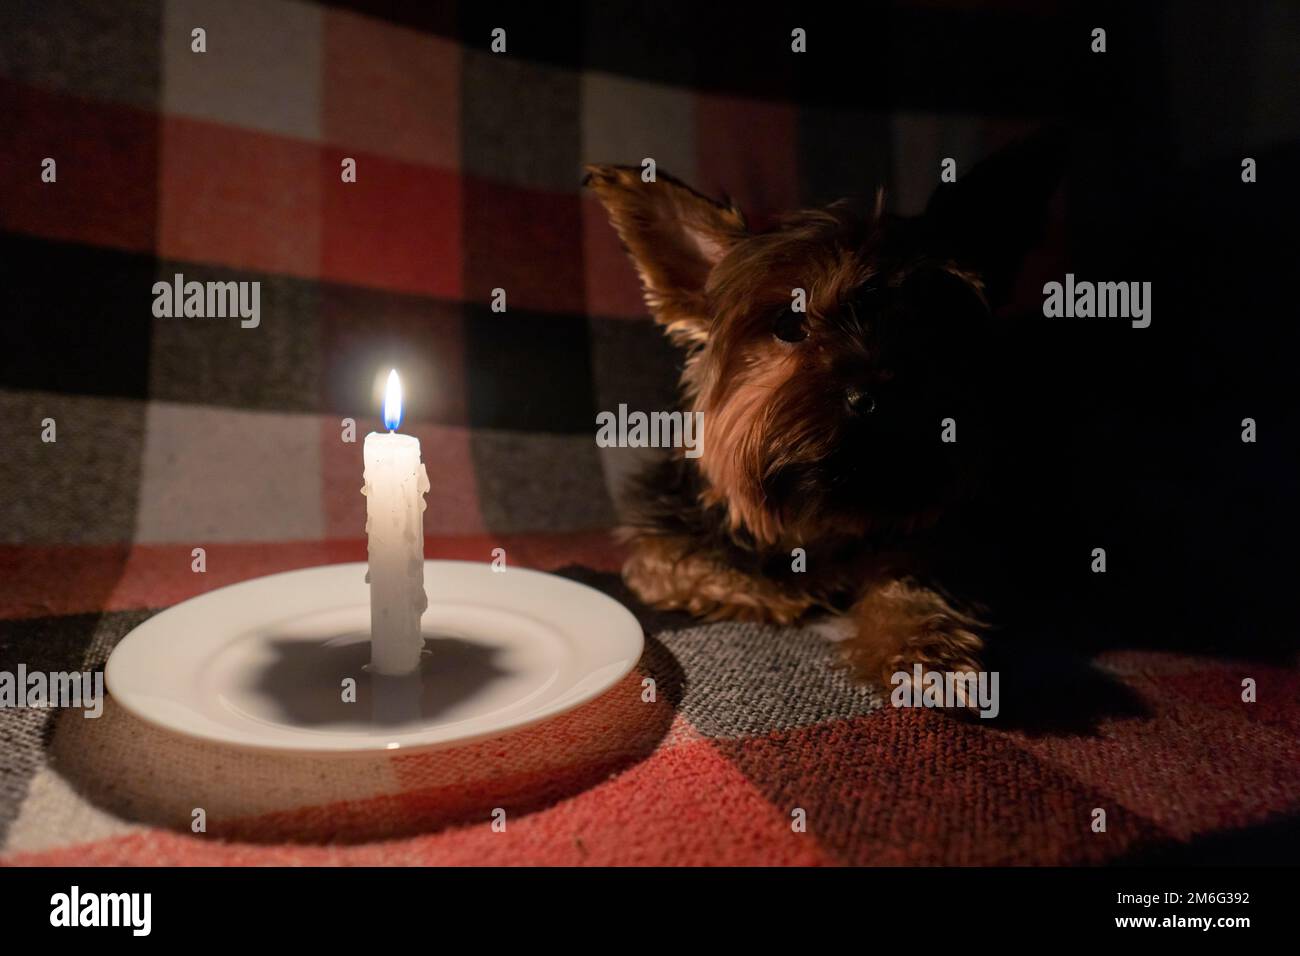 https://c8.alamy.com/comp/2M6G392/a-small-dog-lies-in-a-dark-room-by-the-light-of-a-candle-close-up-blackout-energy-crisis-destruction-of-infrastructure-power-outage-concept-2M6G392.jpg